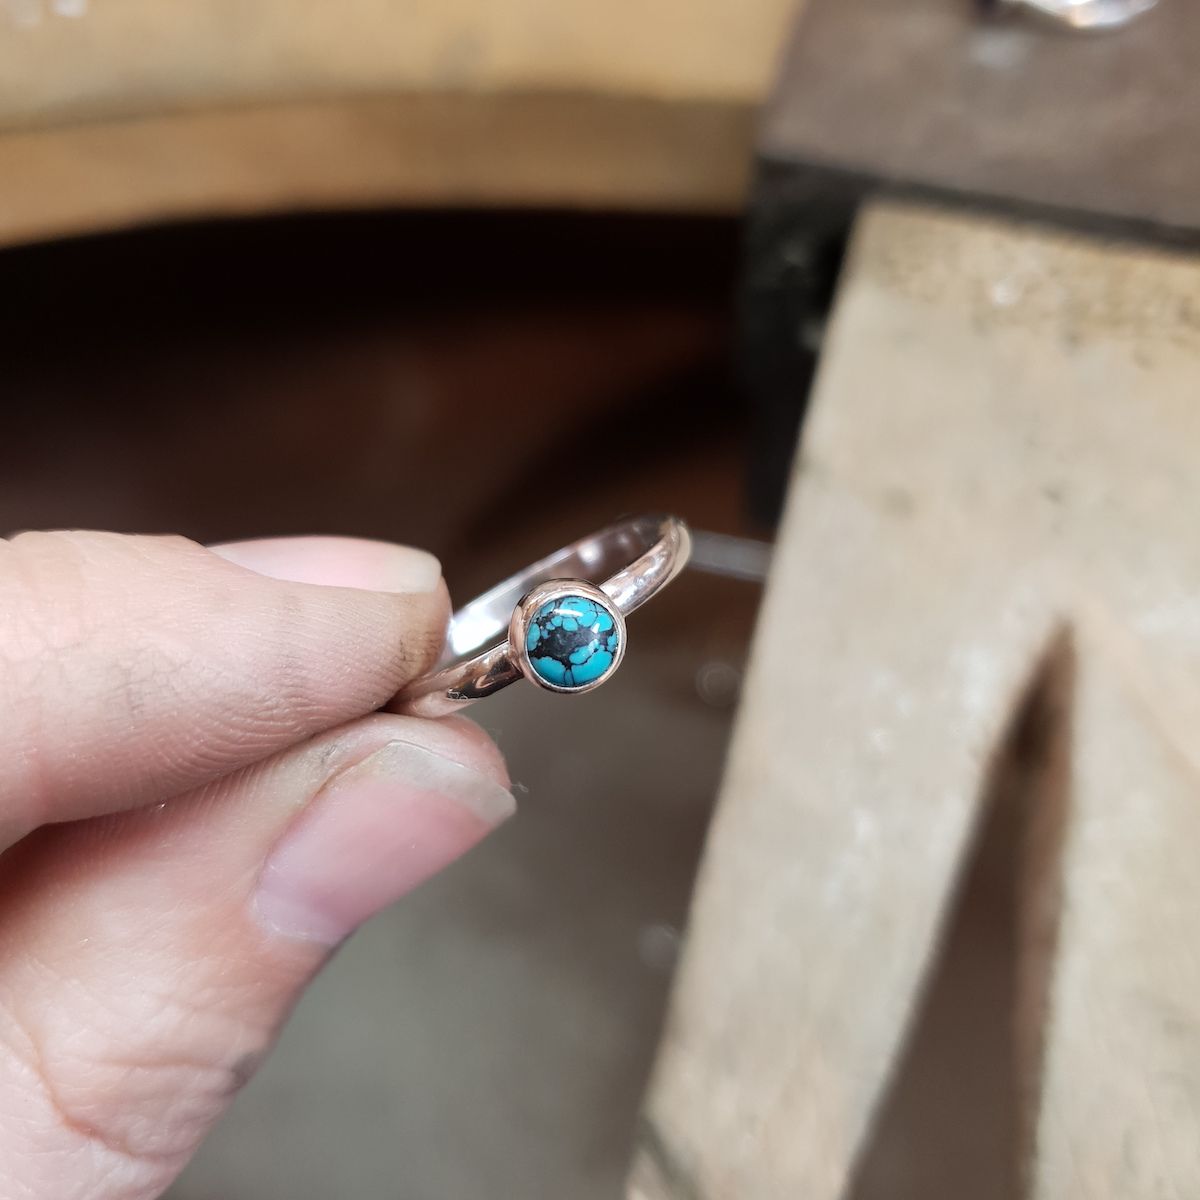 Simple Silver Ring (Torch Soldering) : 10 Steps (with Pictures